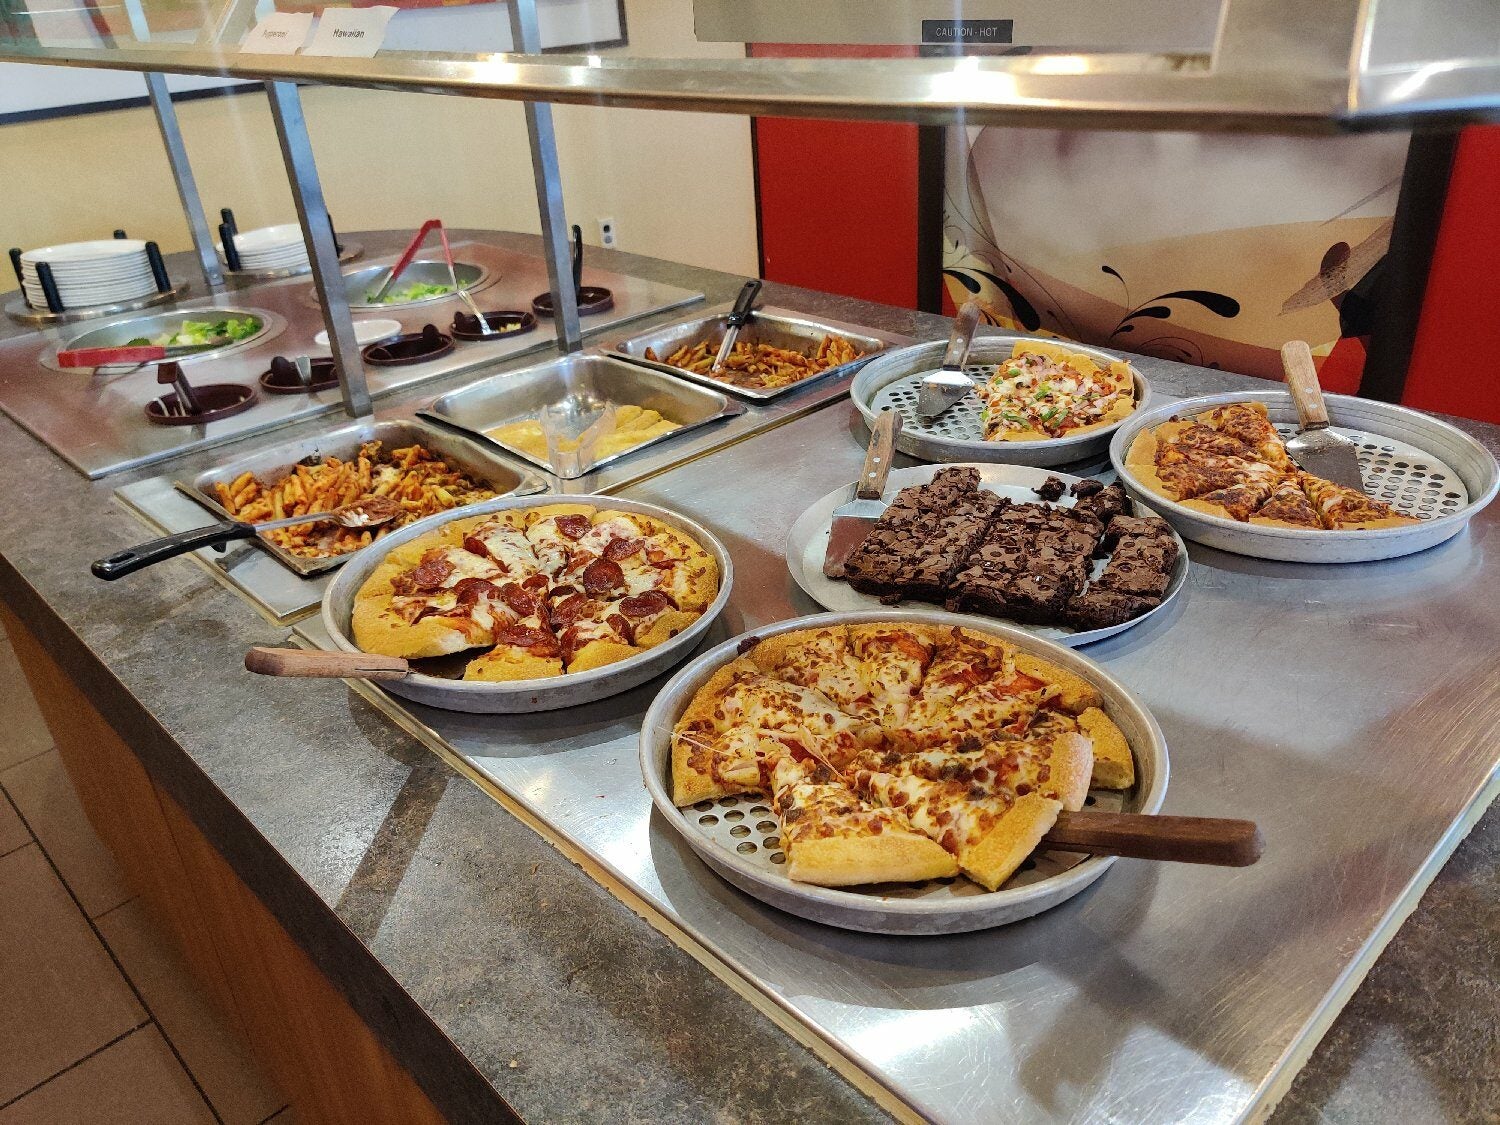 BREAKING NEWS! - Pizza Hut Lunch Buffet is back! Good times! #fypシ #p, pizza hut buffet canada